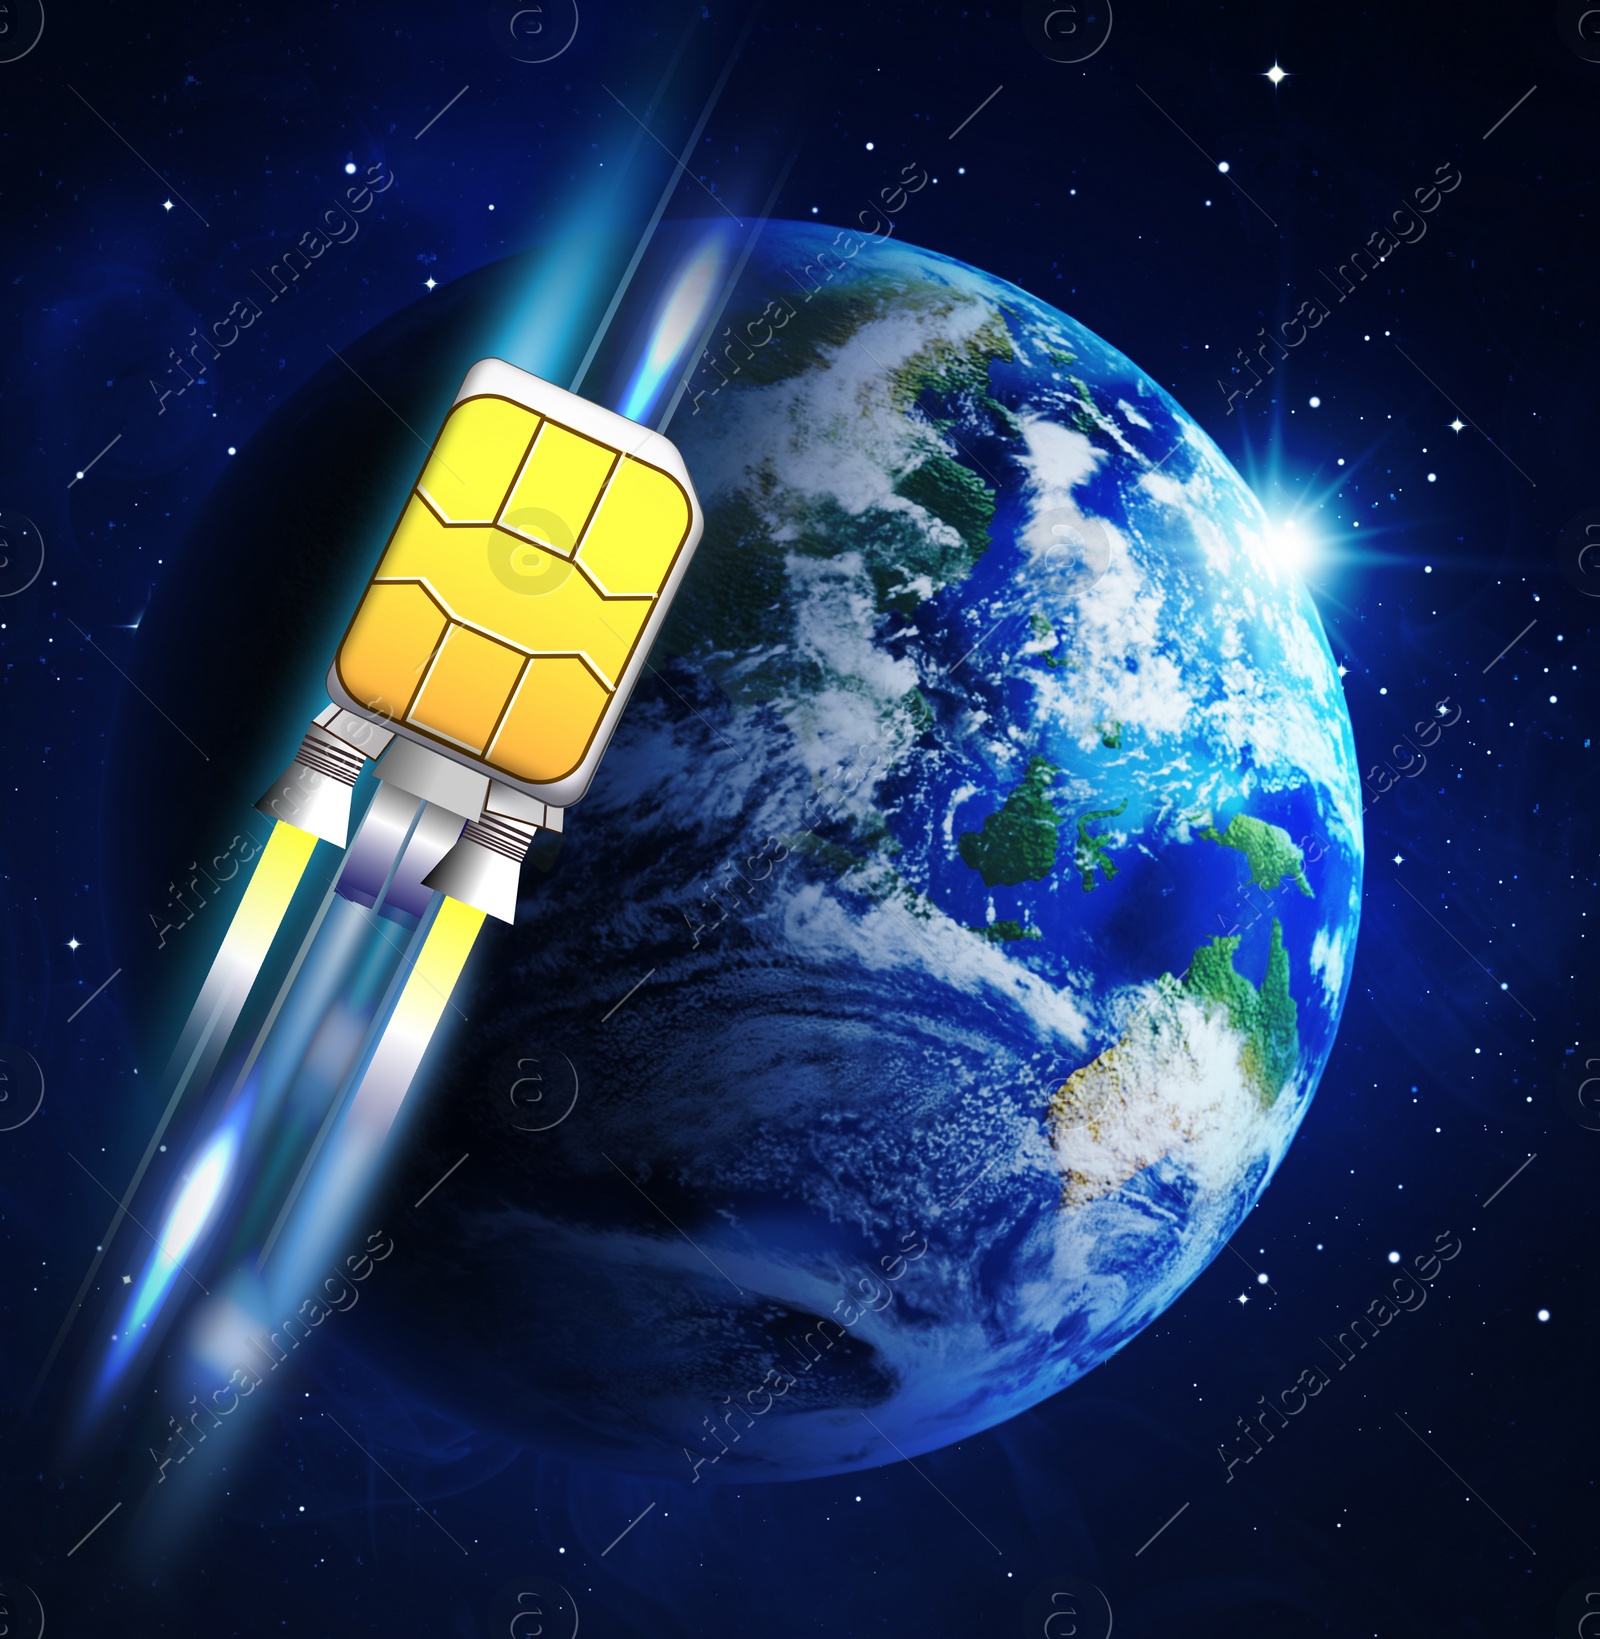 Image of Fast internet connection. SIM card rocket flying around planet in space